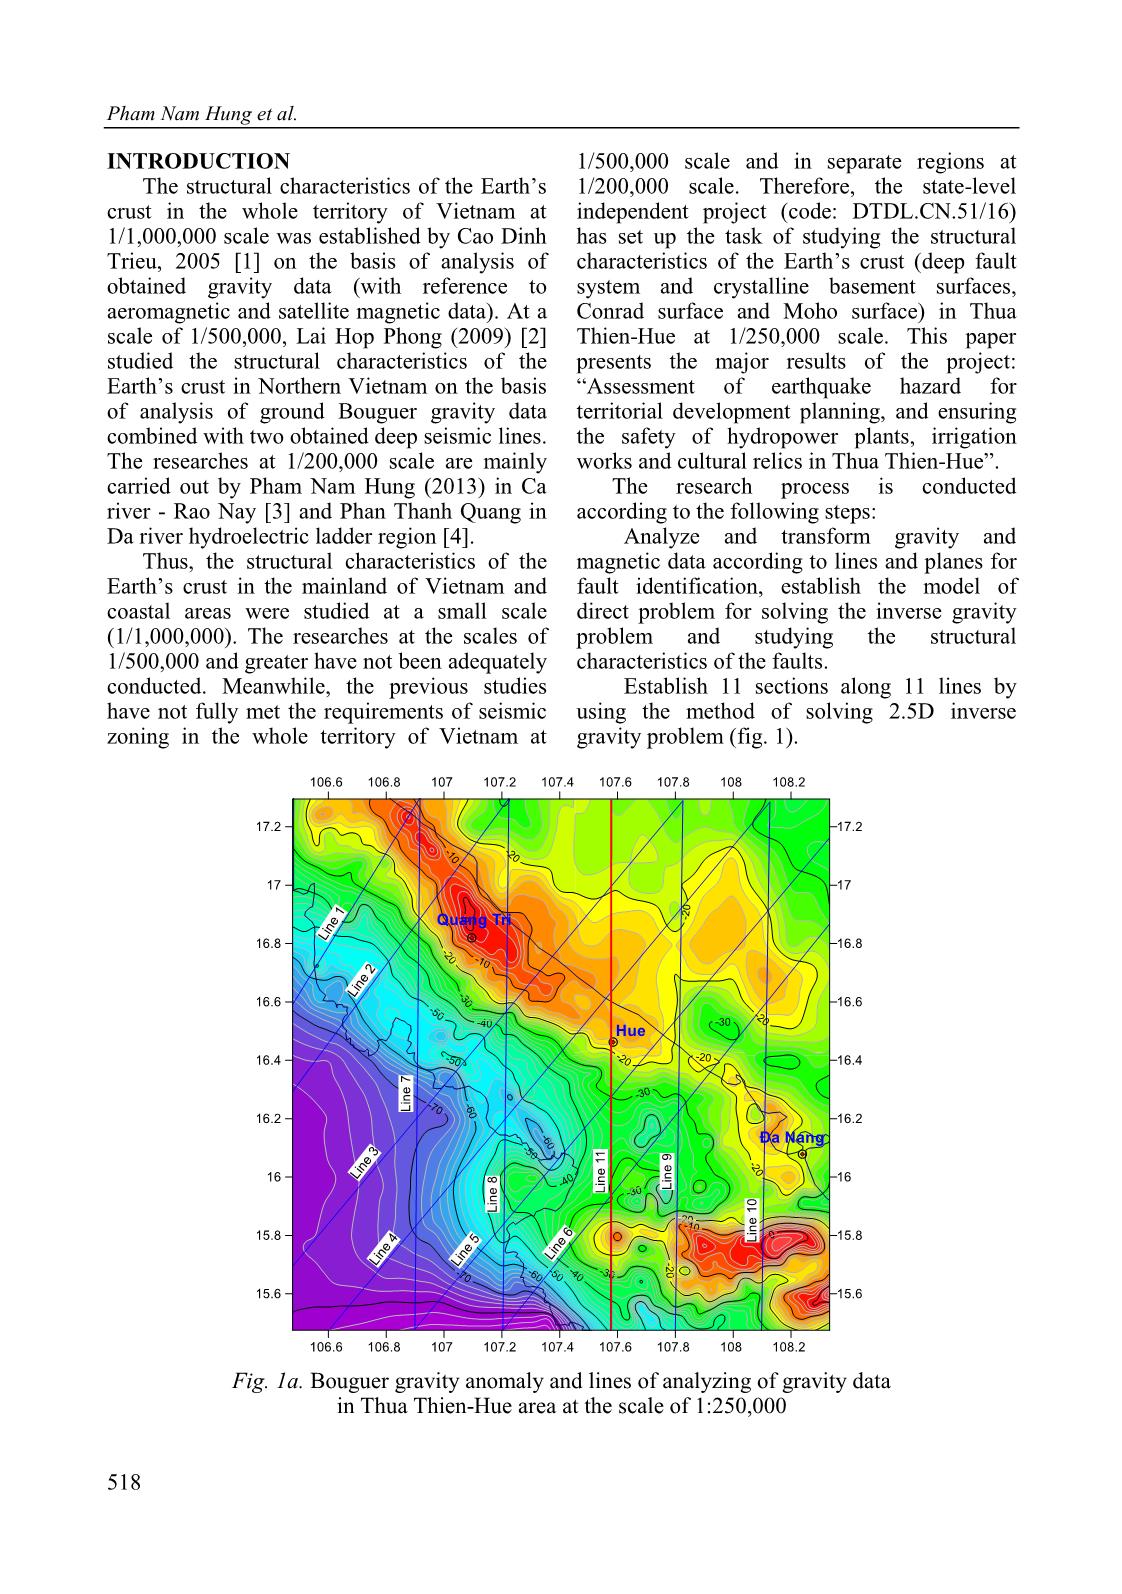 Study on structure of the Earth’s crust in Thua Thien-Hue province and adjacent areas by using gravity and magnetic data in combination trang 2